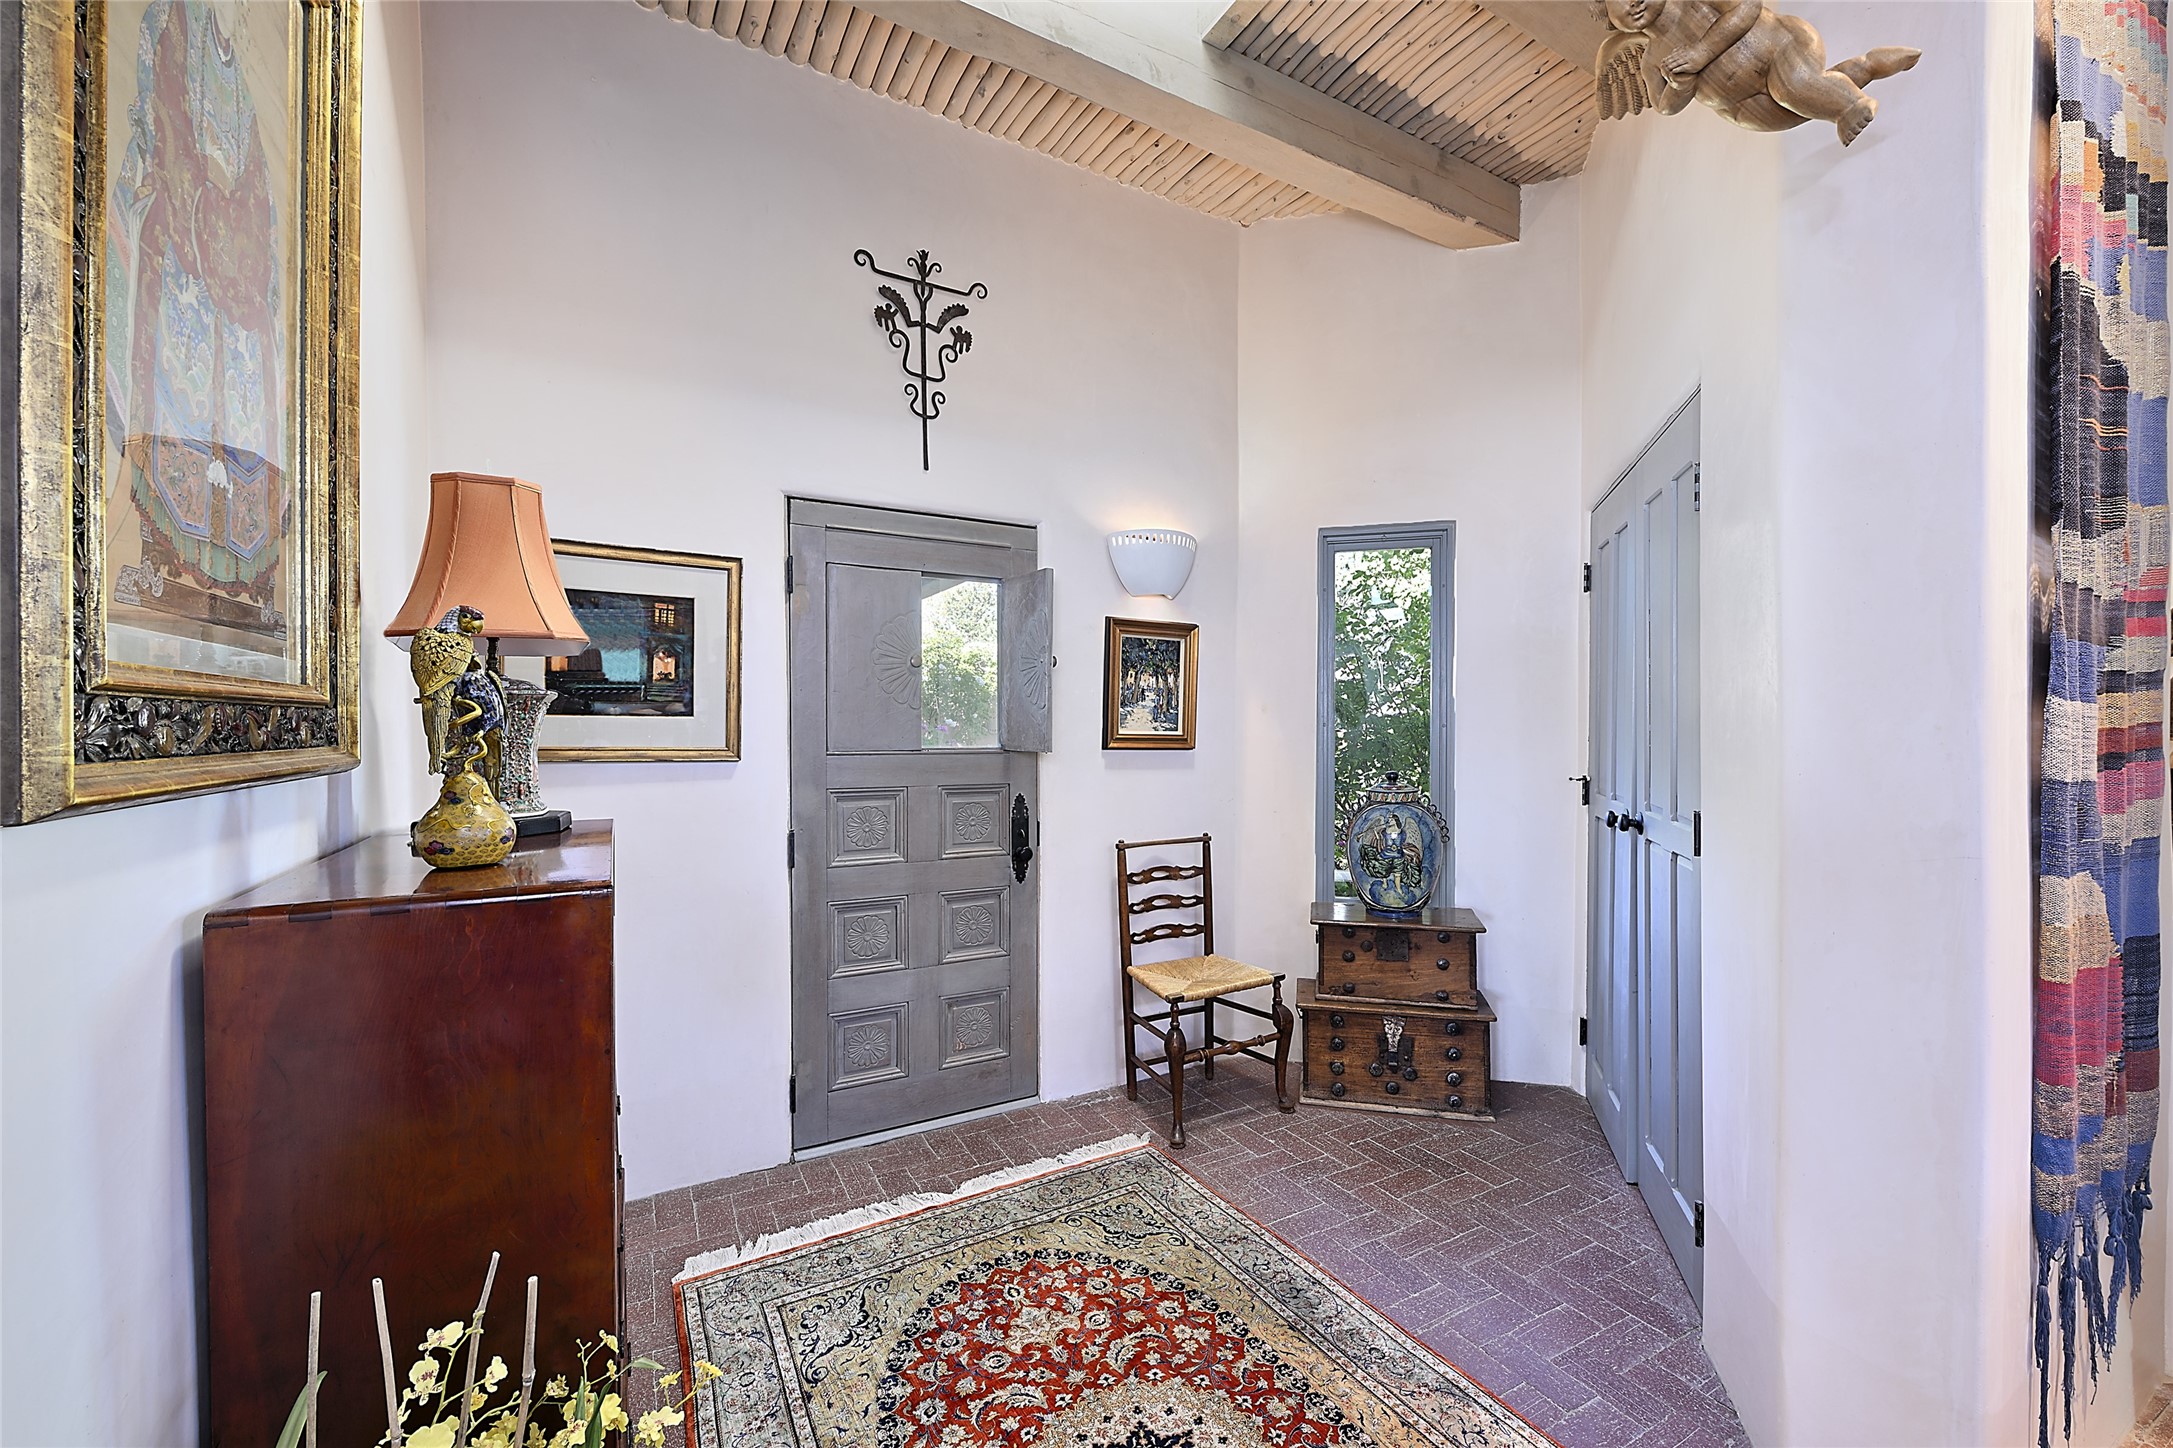 Beneath a tall skylit ceiling of latillas and beams, this small charming foyer includes a coat closet and serves as an auxiliary entrance to the home.